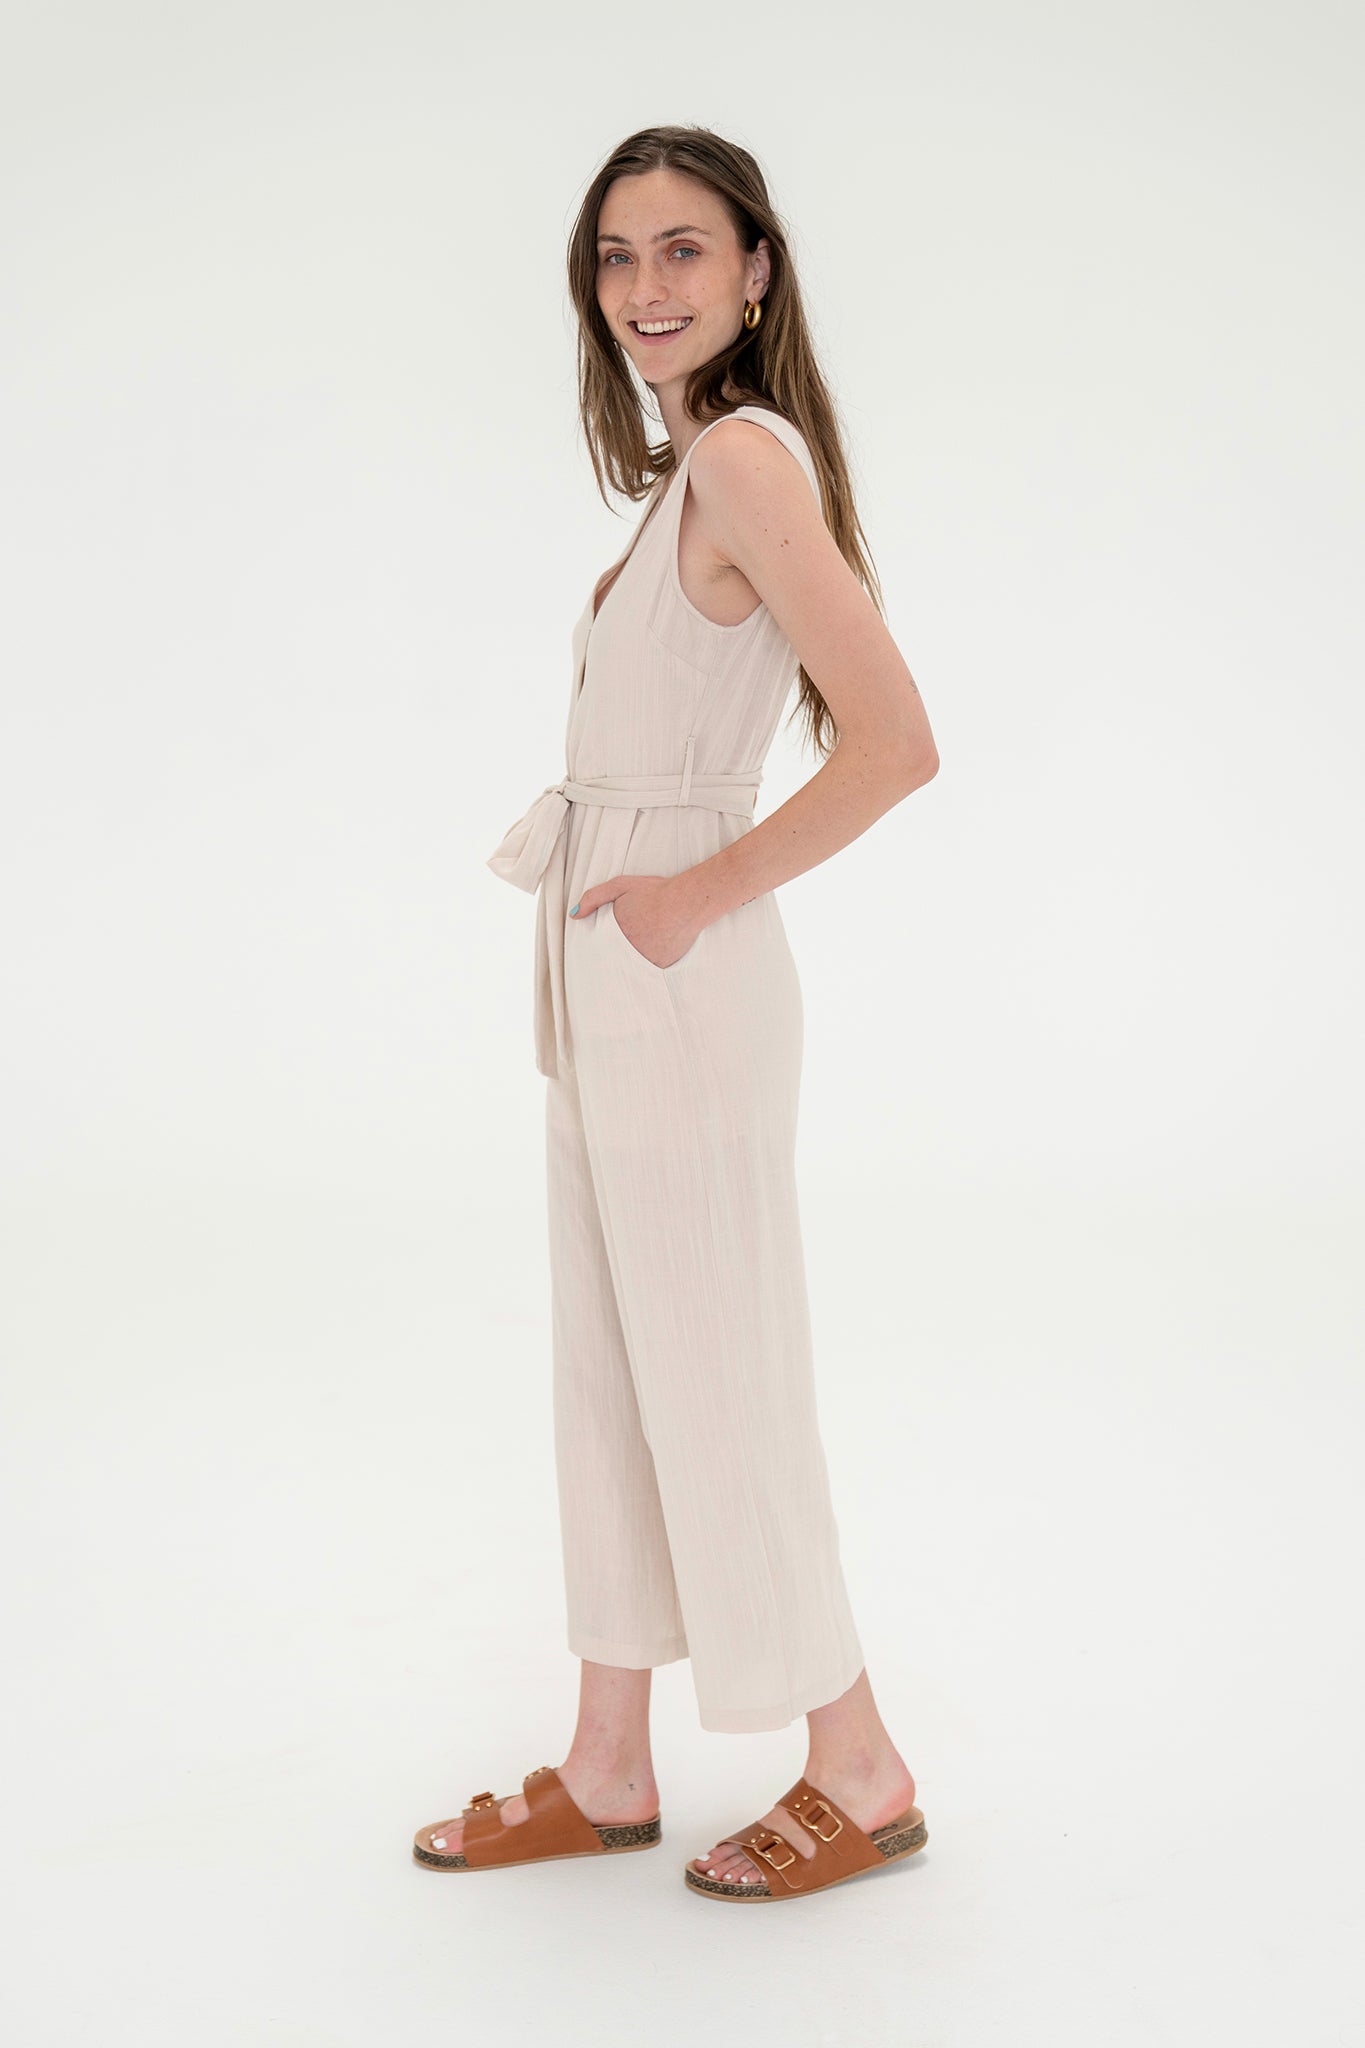 View 2 of Medanos Jumpsuit, a Jumpsuits from Larrea Cove. Detail: .